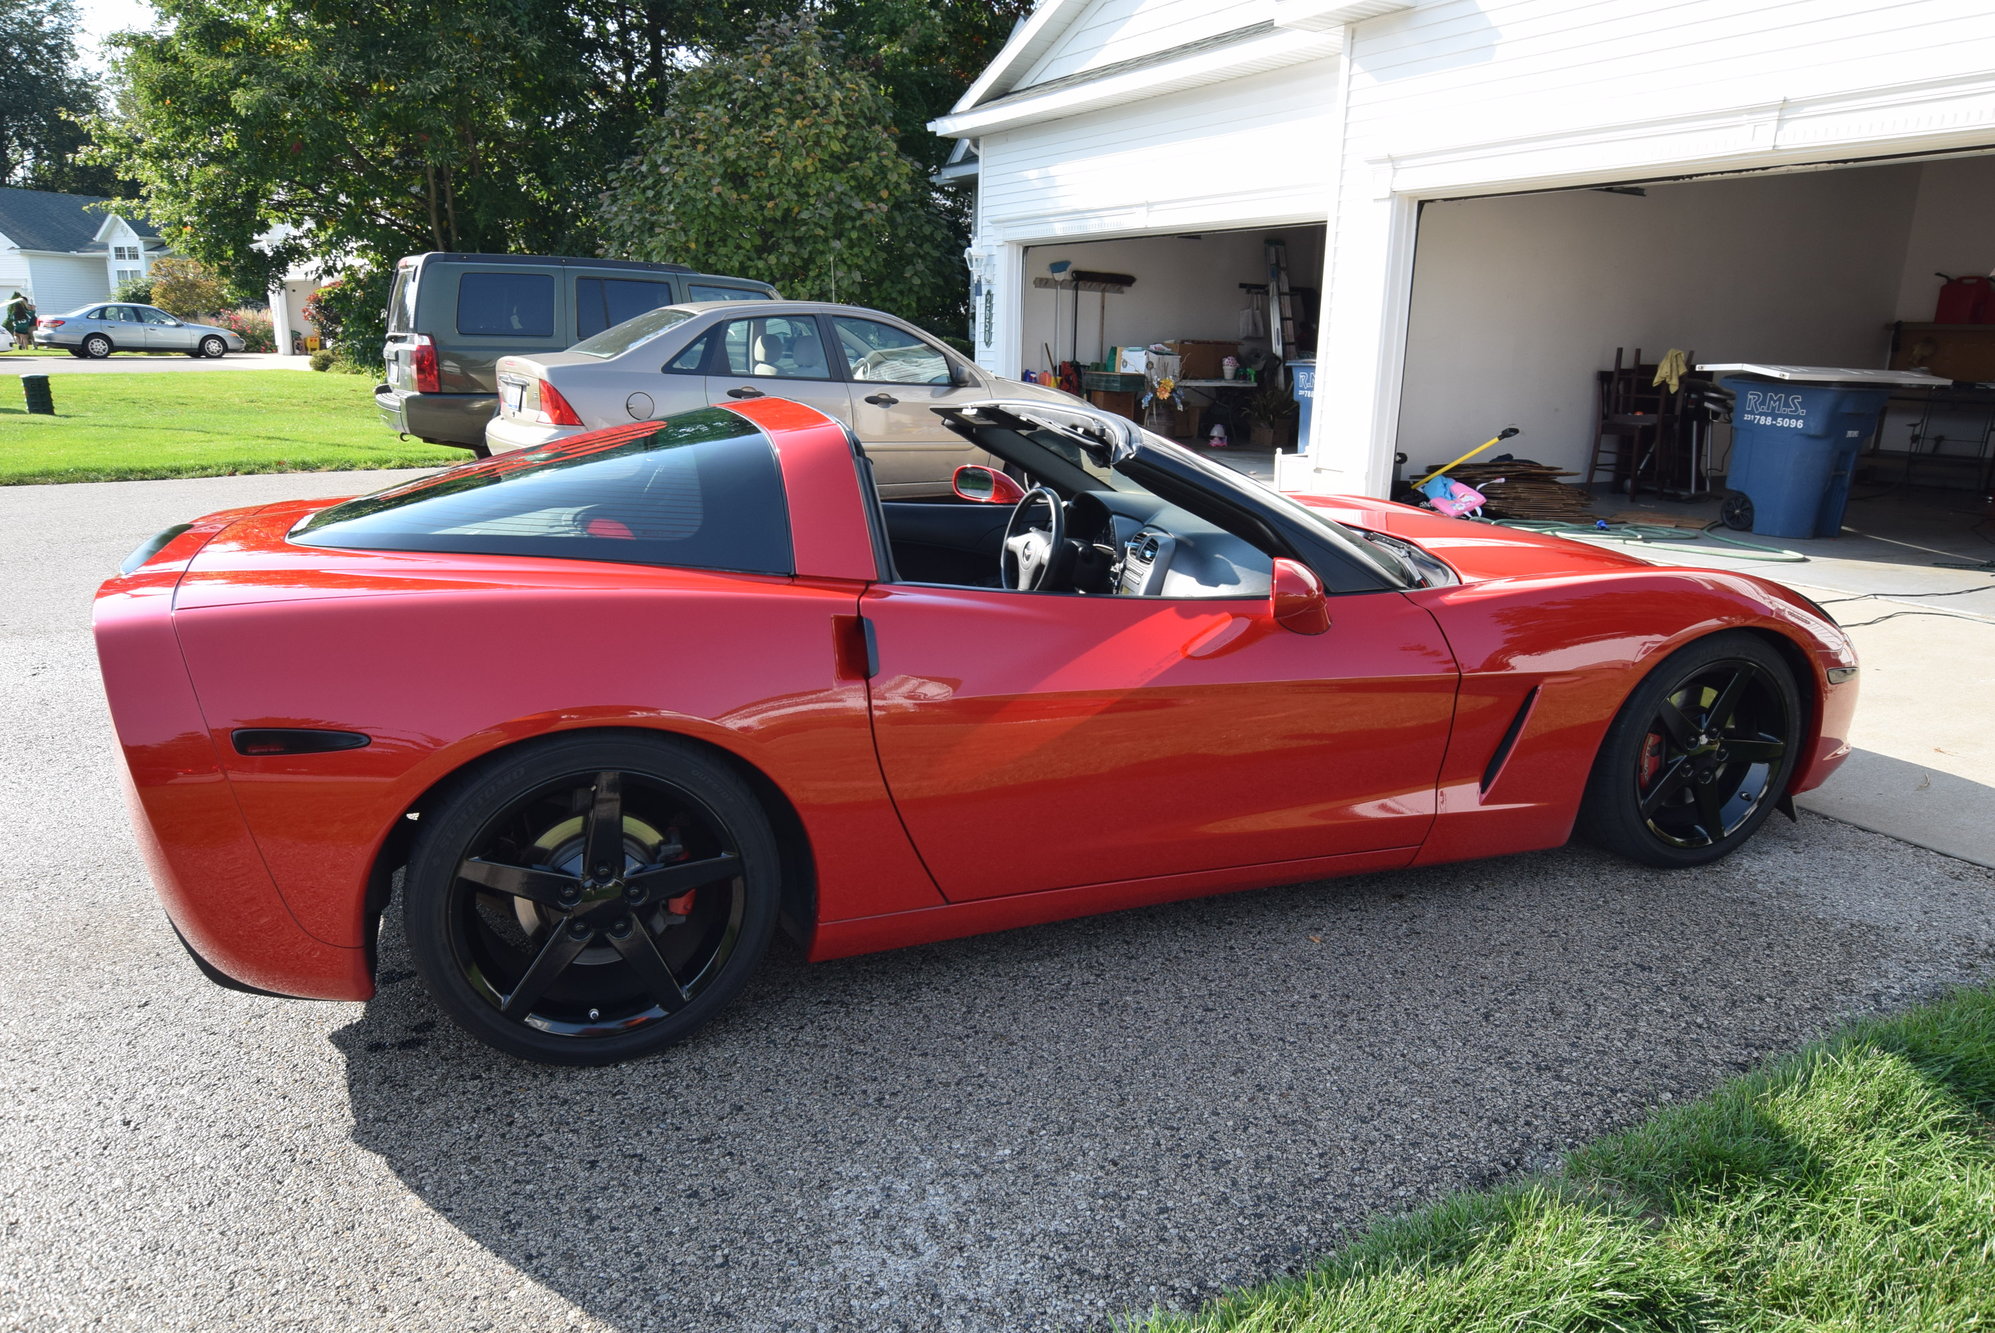 2006 C6 Corvette Targa Top Victory Red Tuned by TJ Grimes at Baker Engineer...